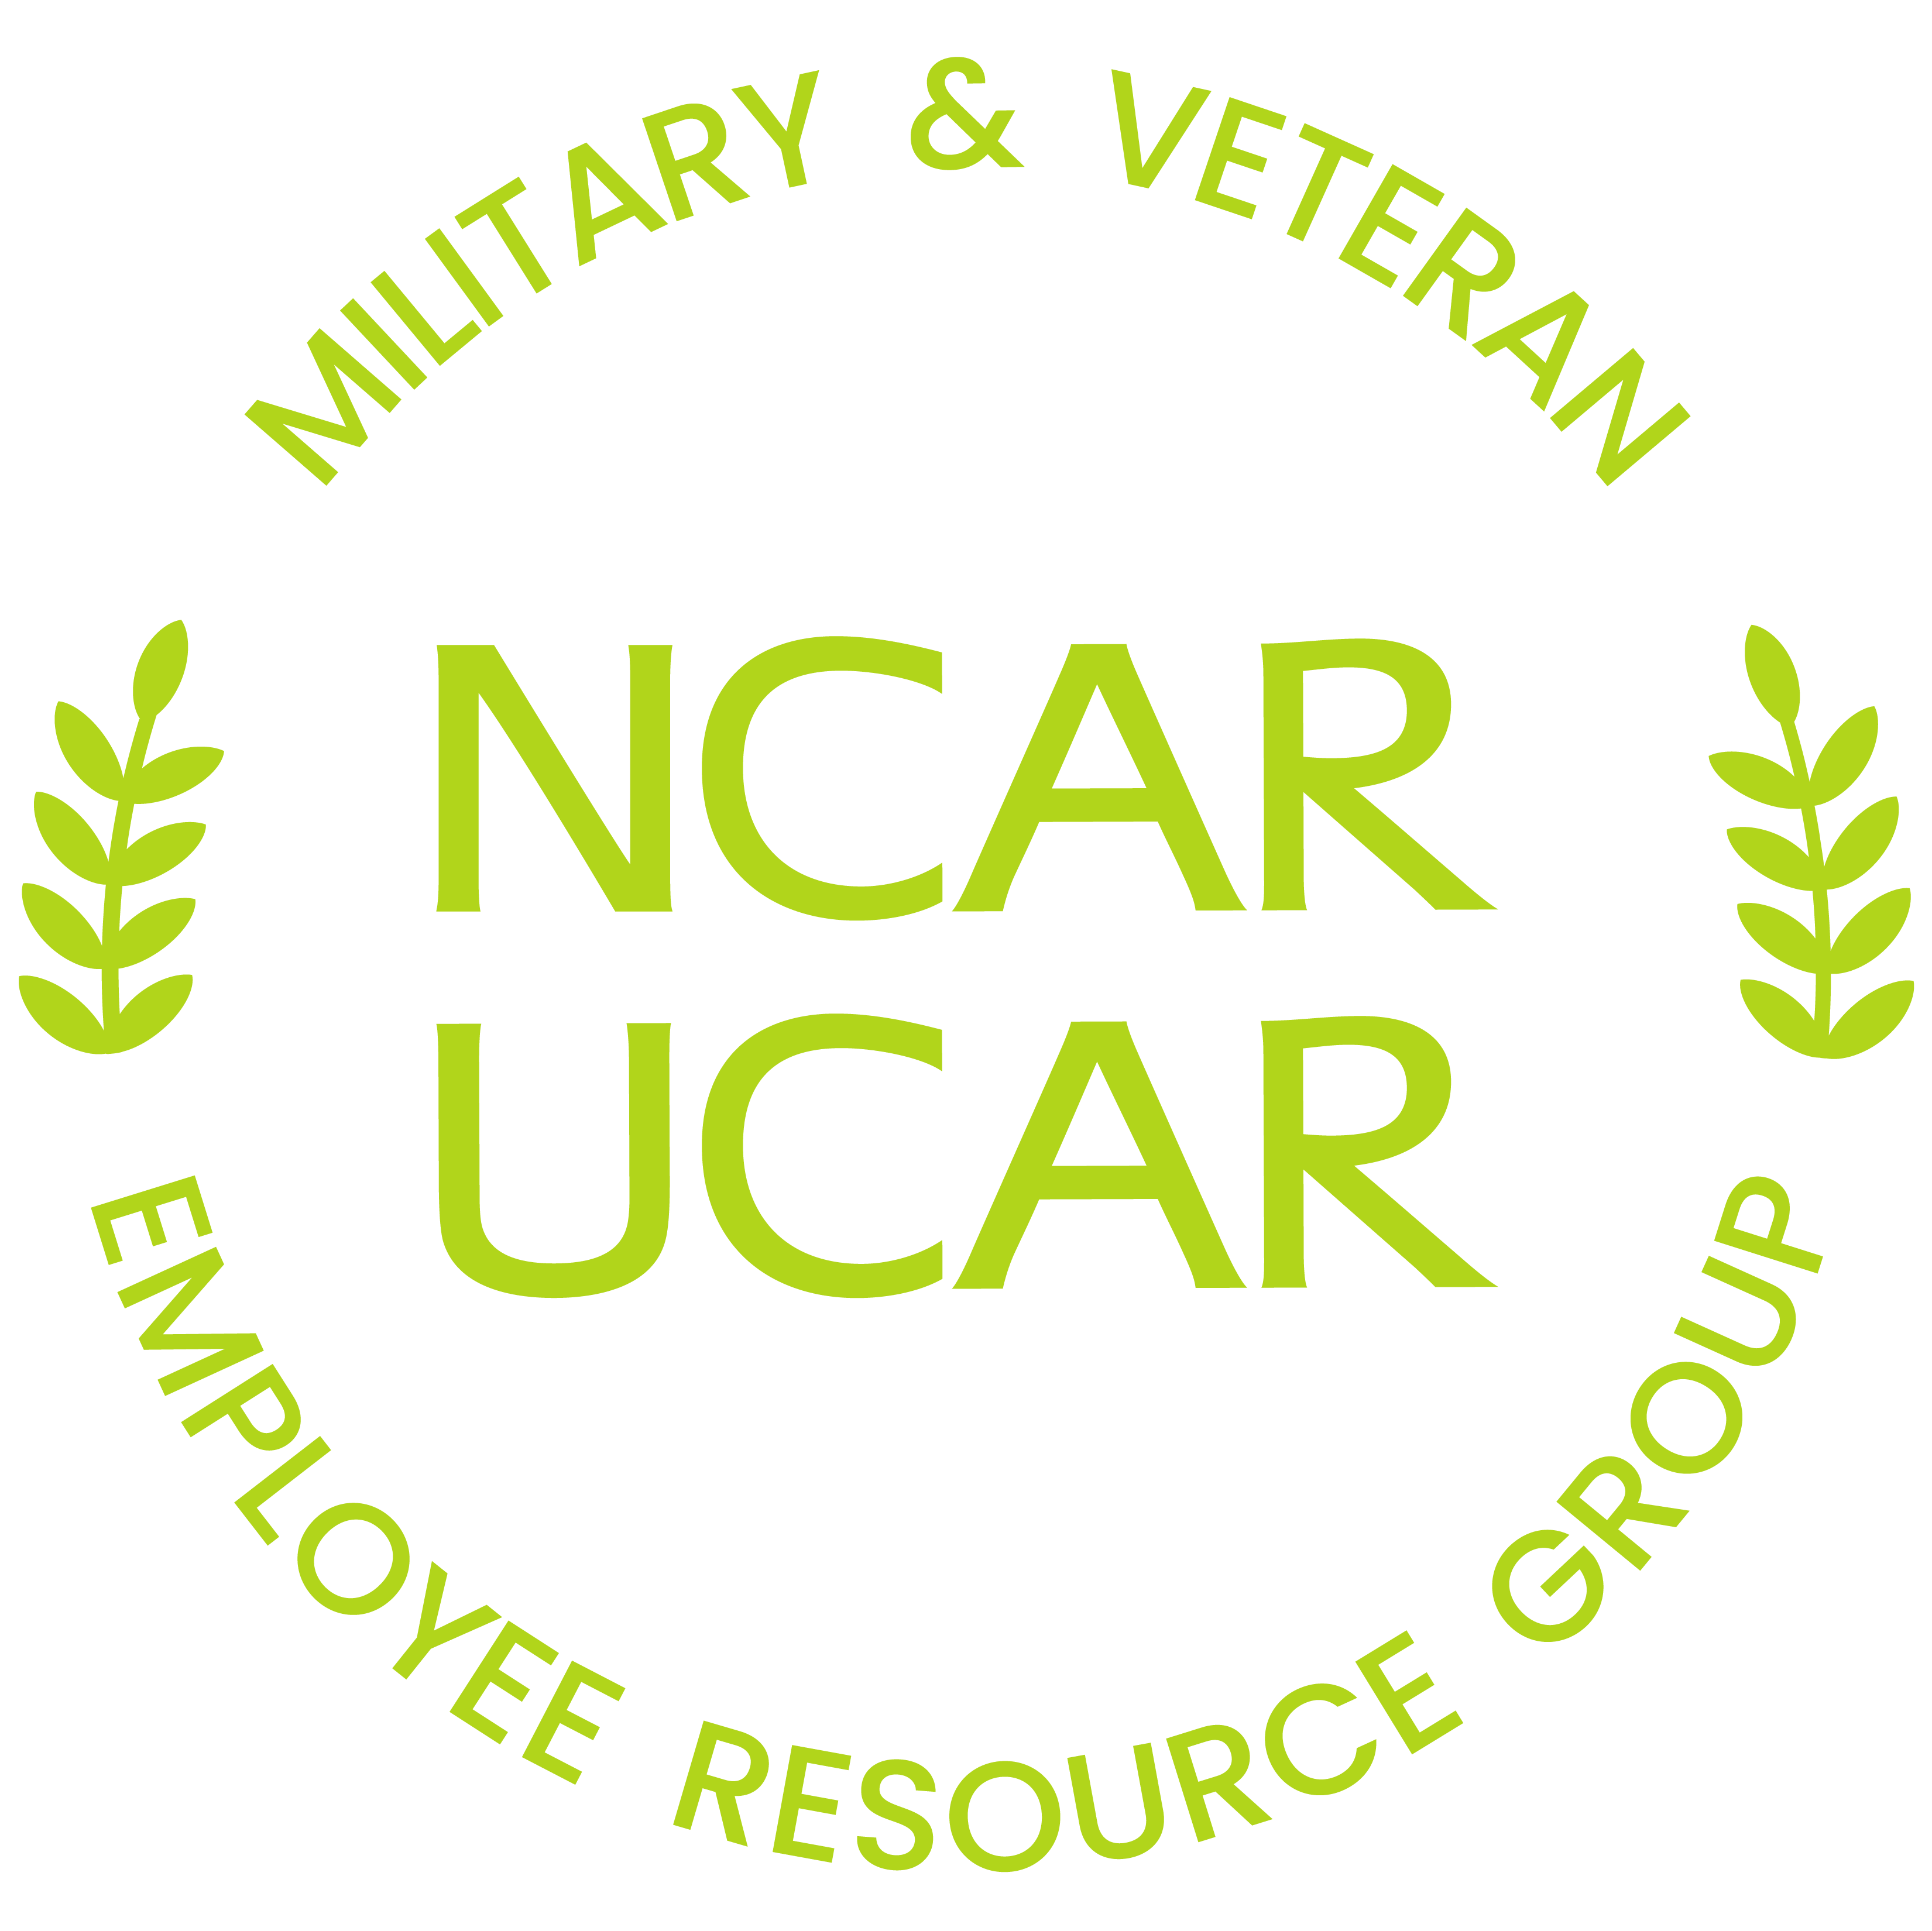 Military and veterans logo in green and leaves